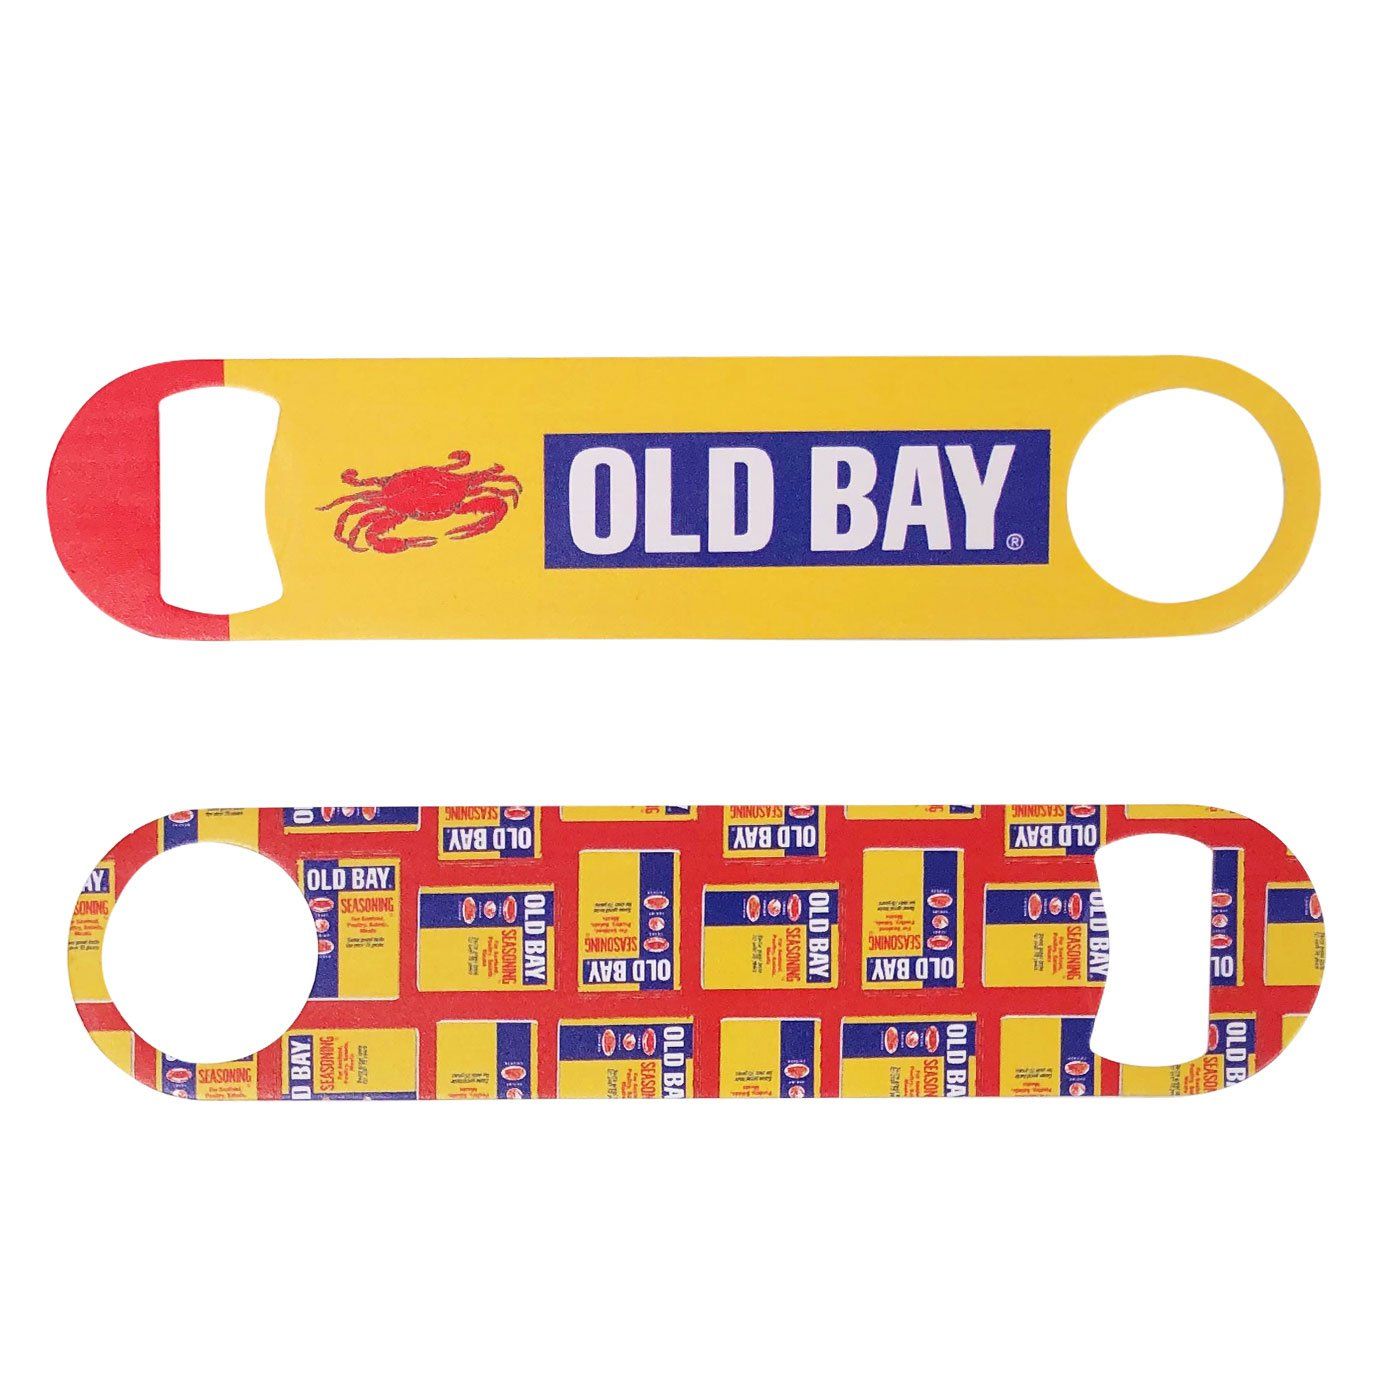 Old Bay / Bottle Opener - Route One Apparel